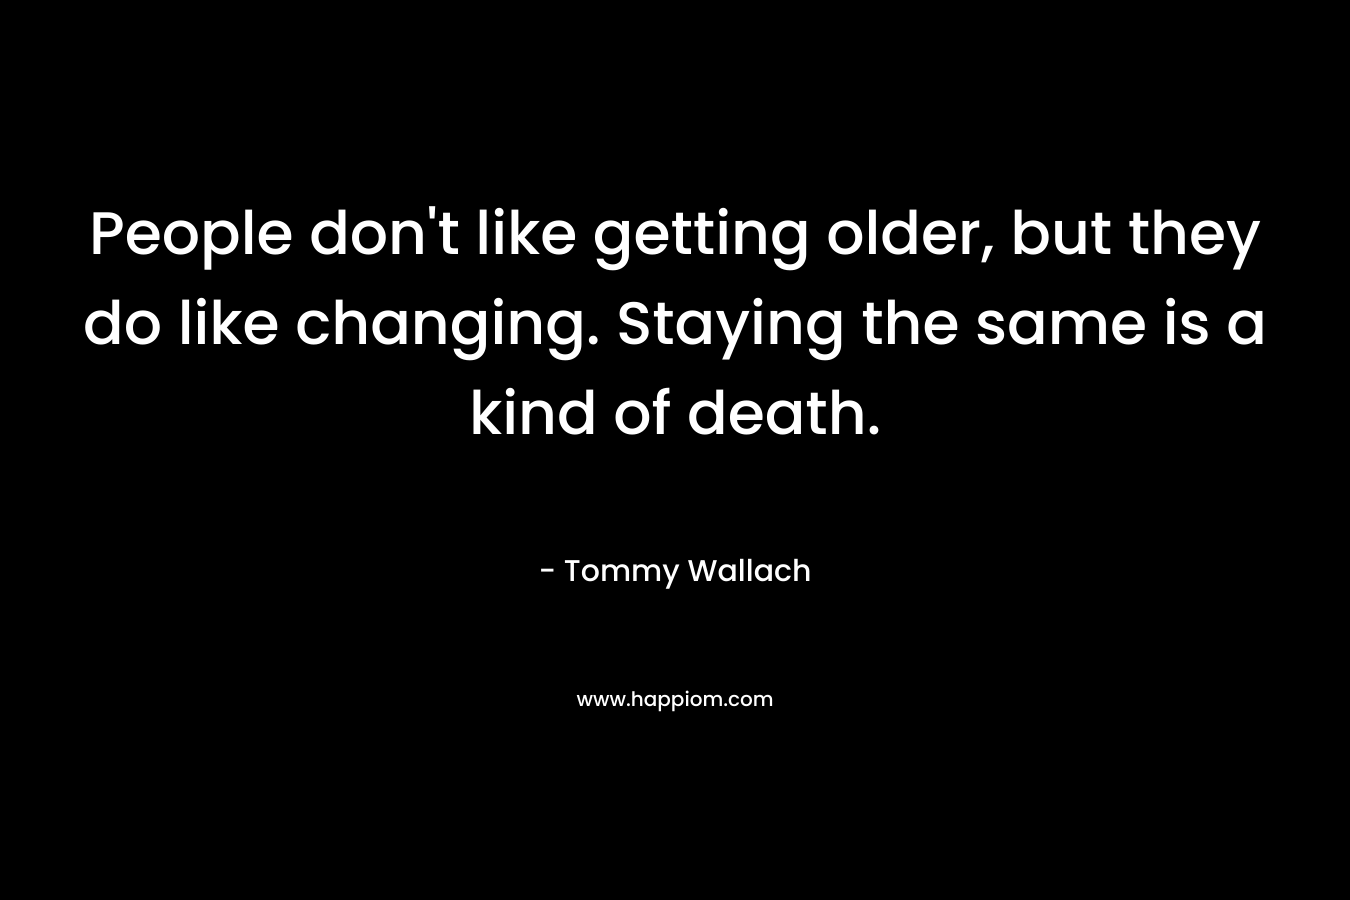 People don't like getting older, but they do like changing. Staying the same is a kind of death.